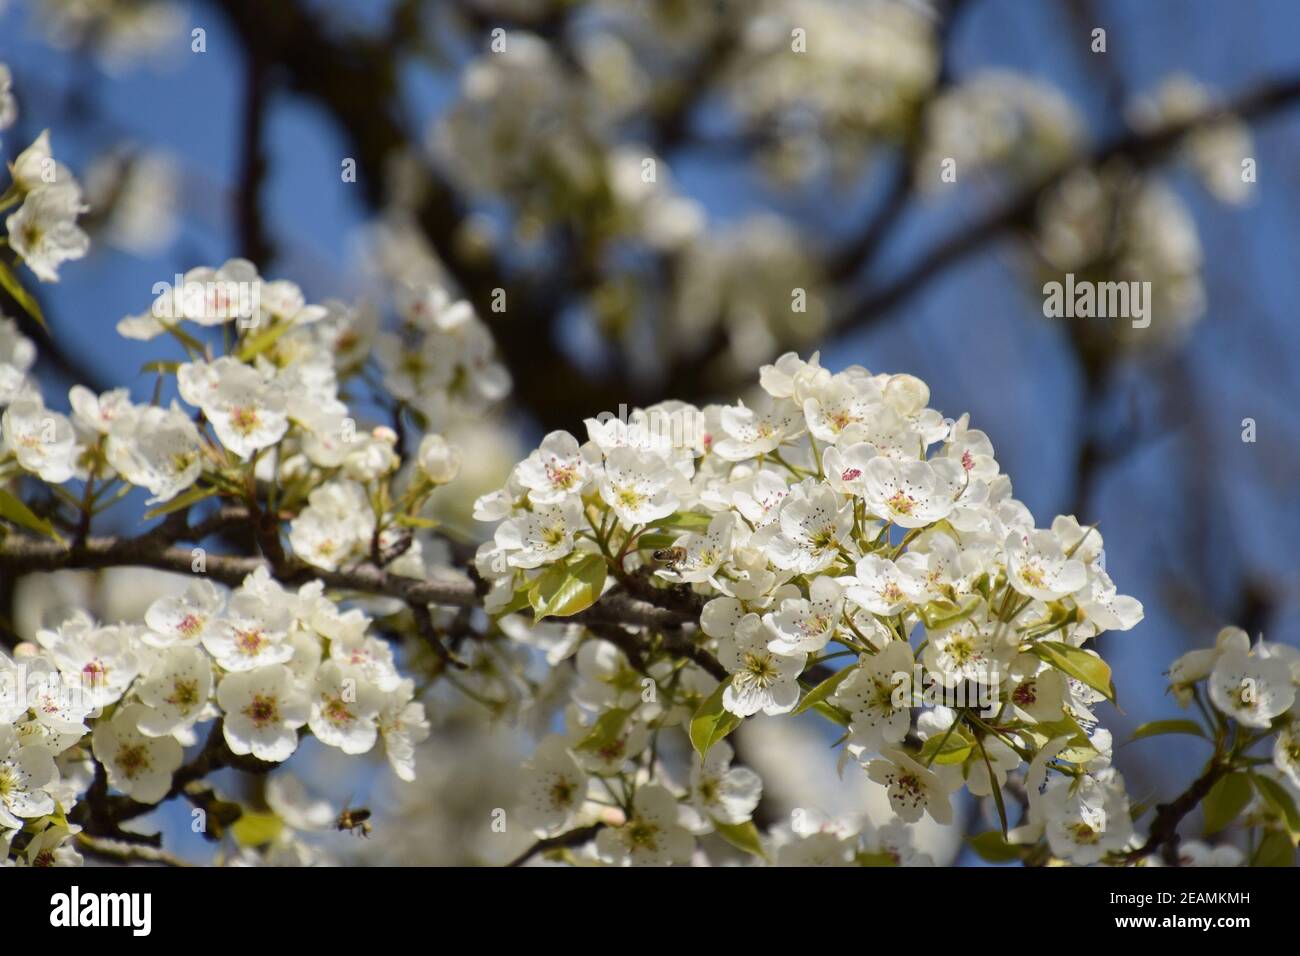 Pollination of flowers by bees pears. Stock Photo